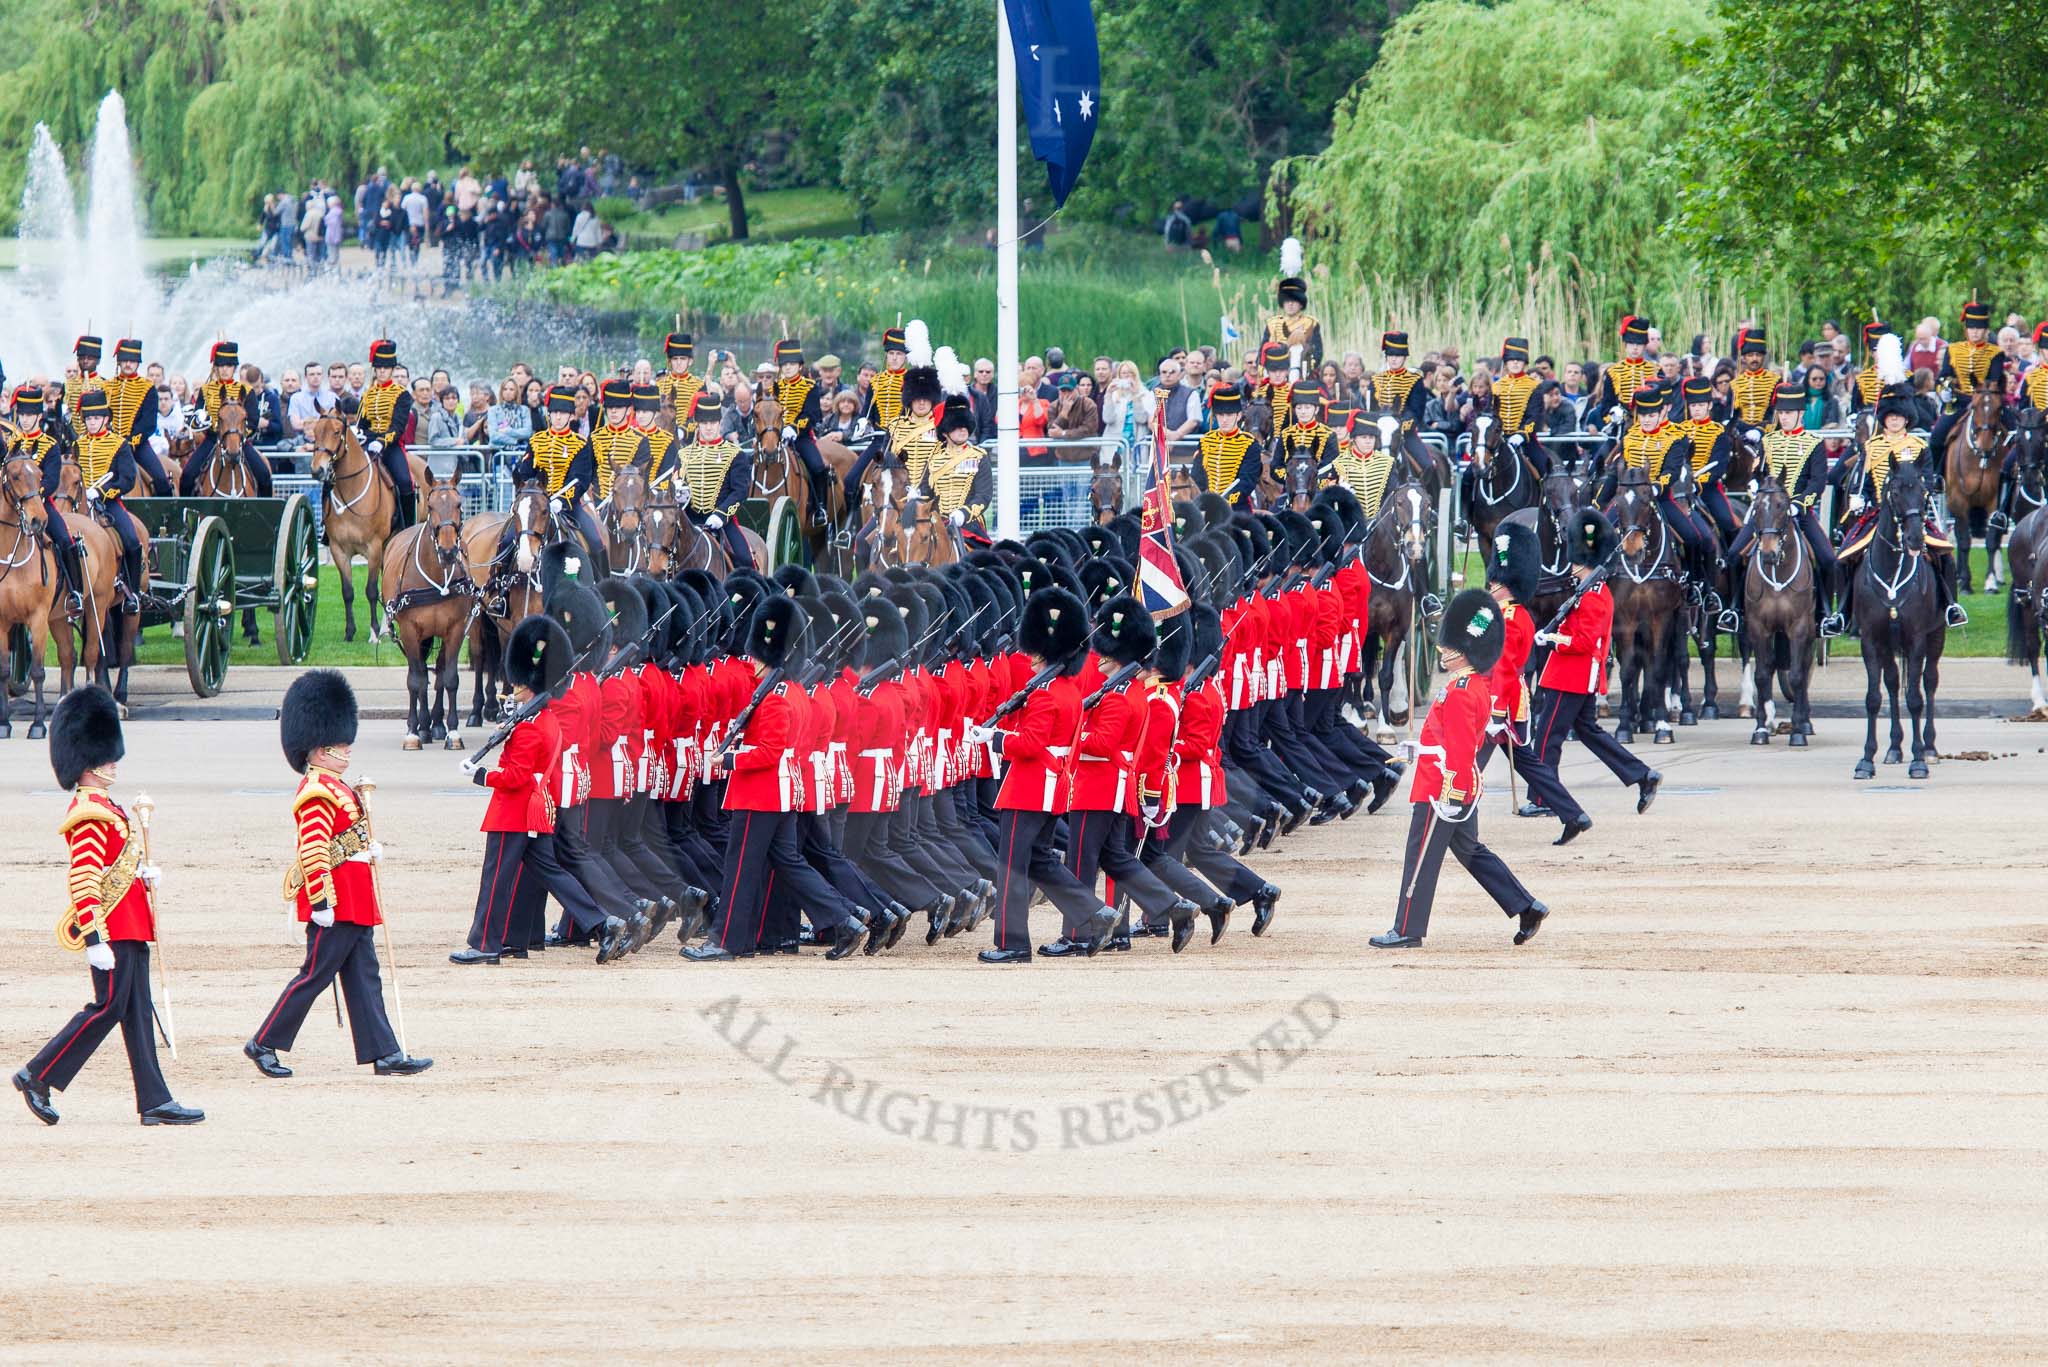 Major General's Review 2013: No. 1 Guard (Escort to the Colour),1st Battalion Welsh Guards, at the begin of the March Past..
Horse Guards Parade, Westminster,
London SW1,

United Kingdom,
on 01 June 2013 at 11:29, image #453